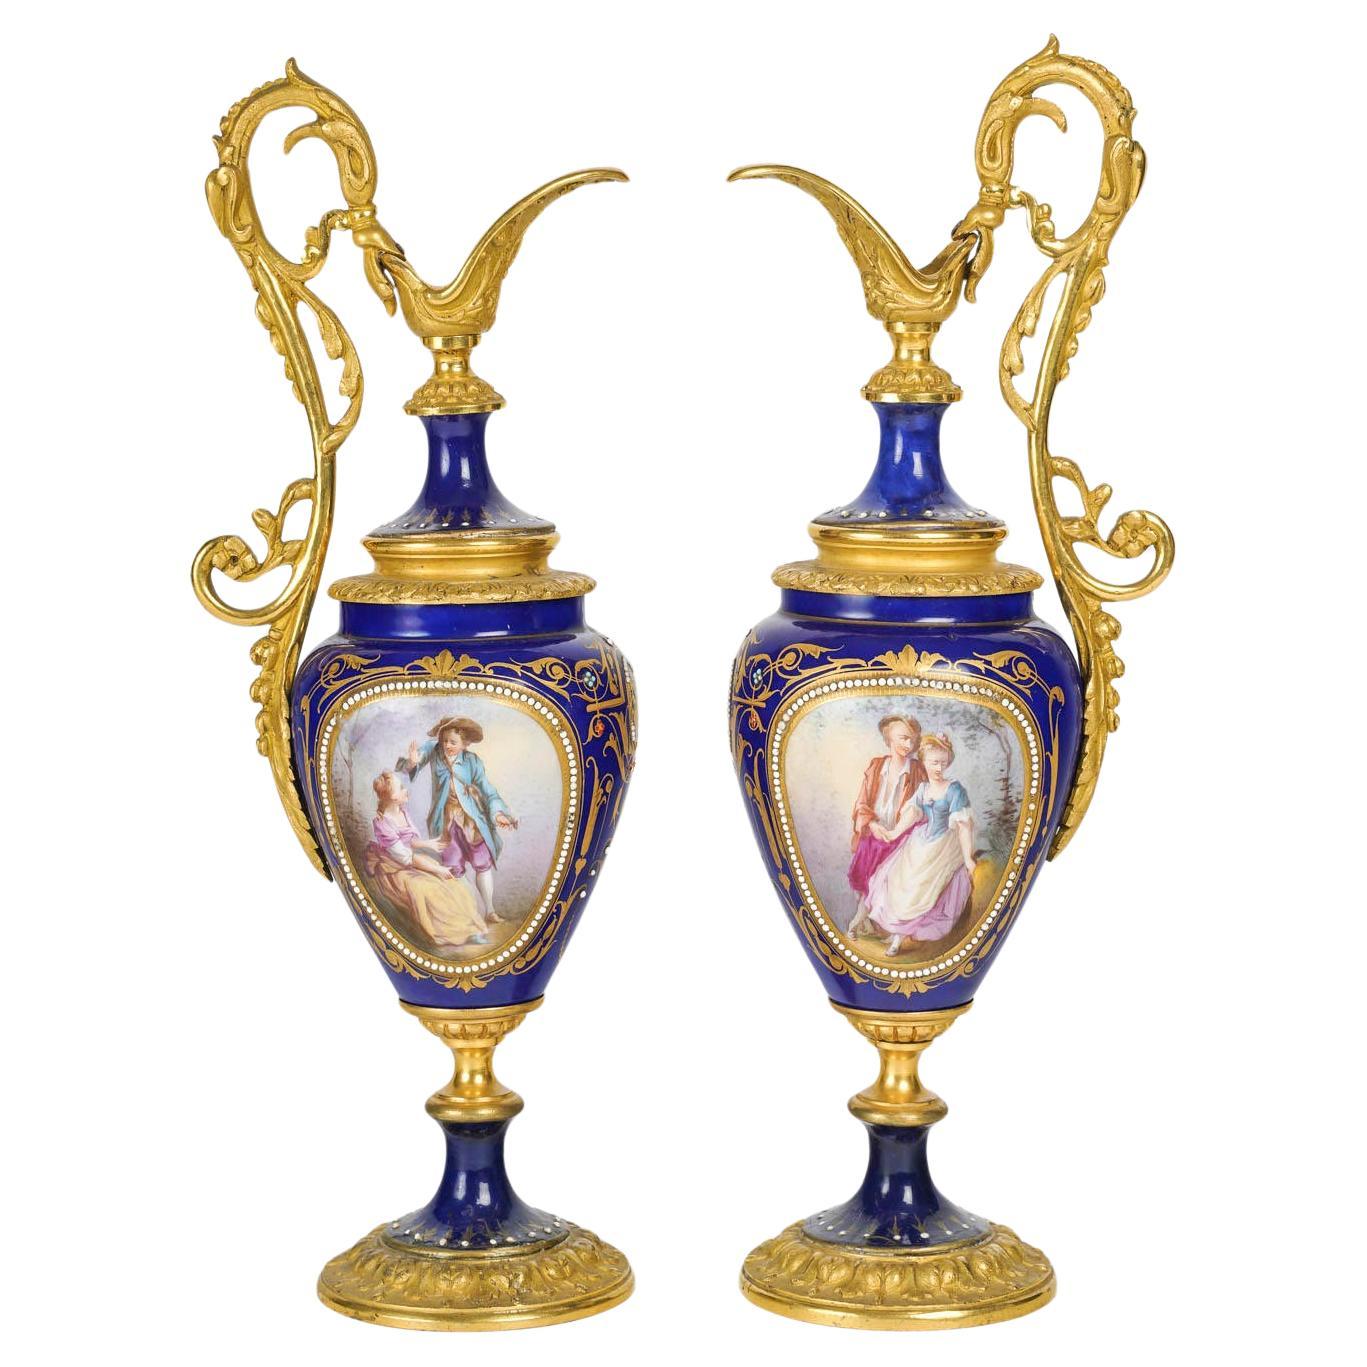 A pair of Gilt Bronze and Royal Blue Porcelain Ewers, 19th Century, Napoleon III